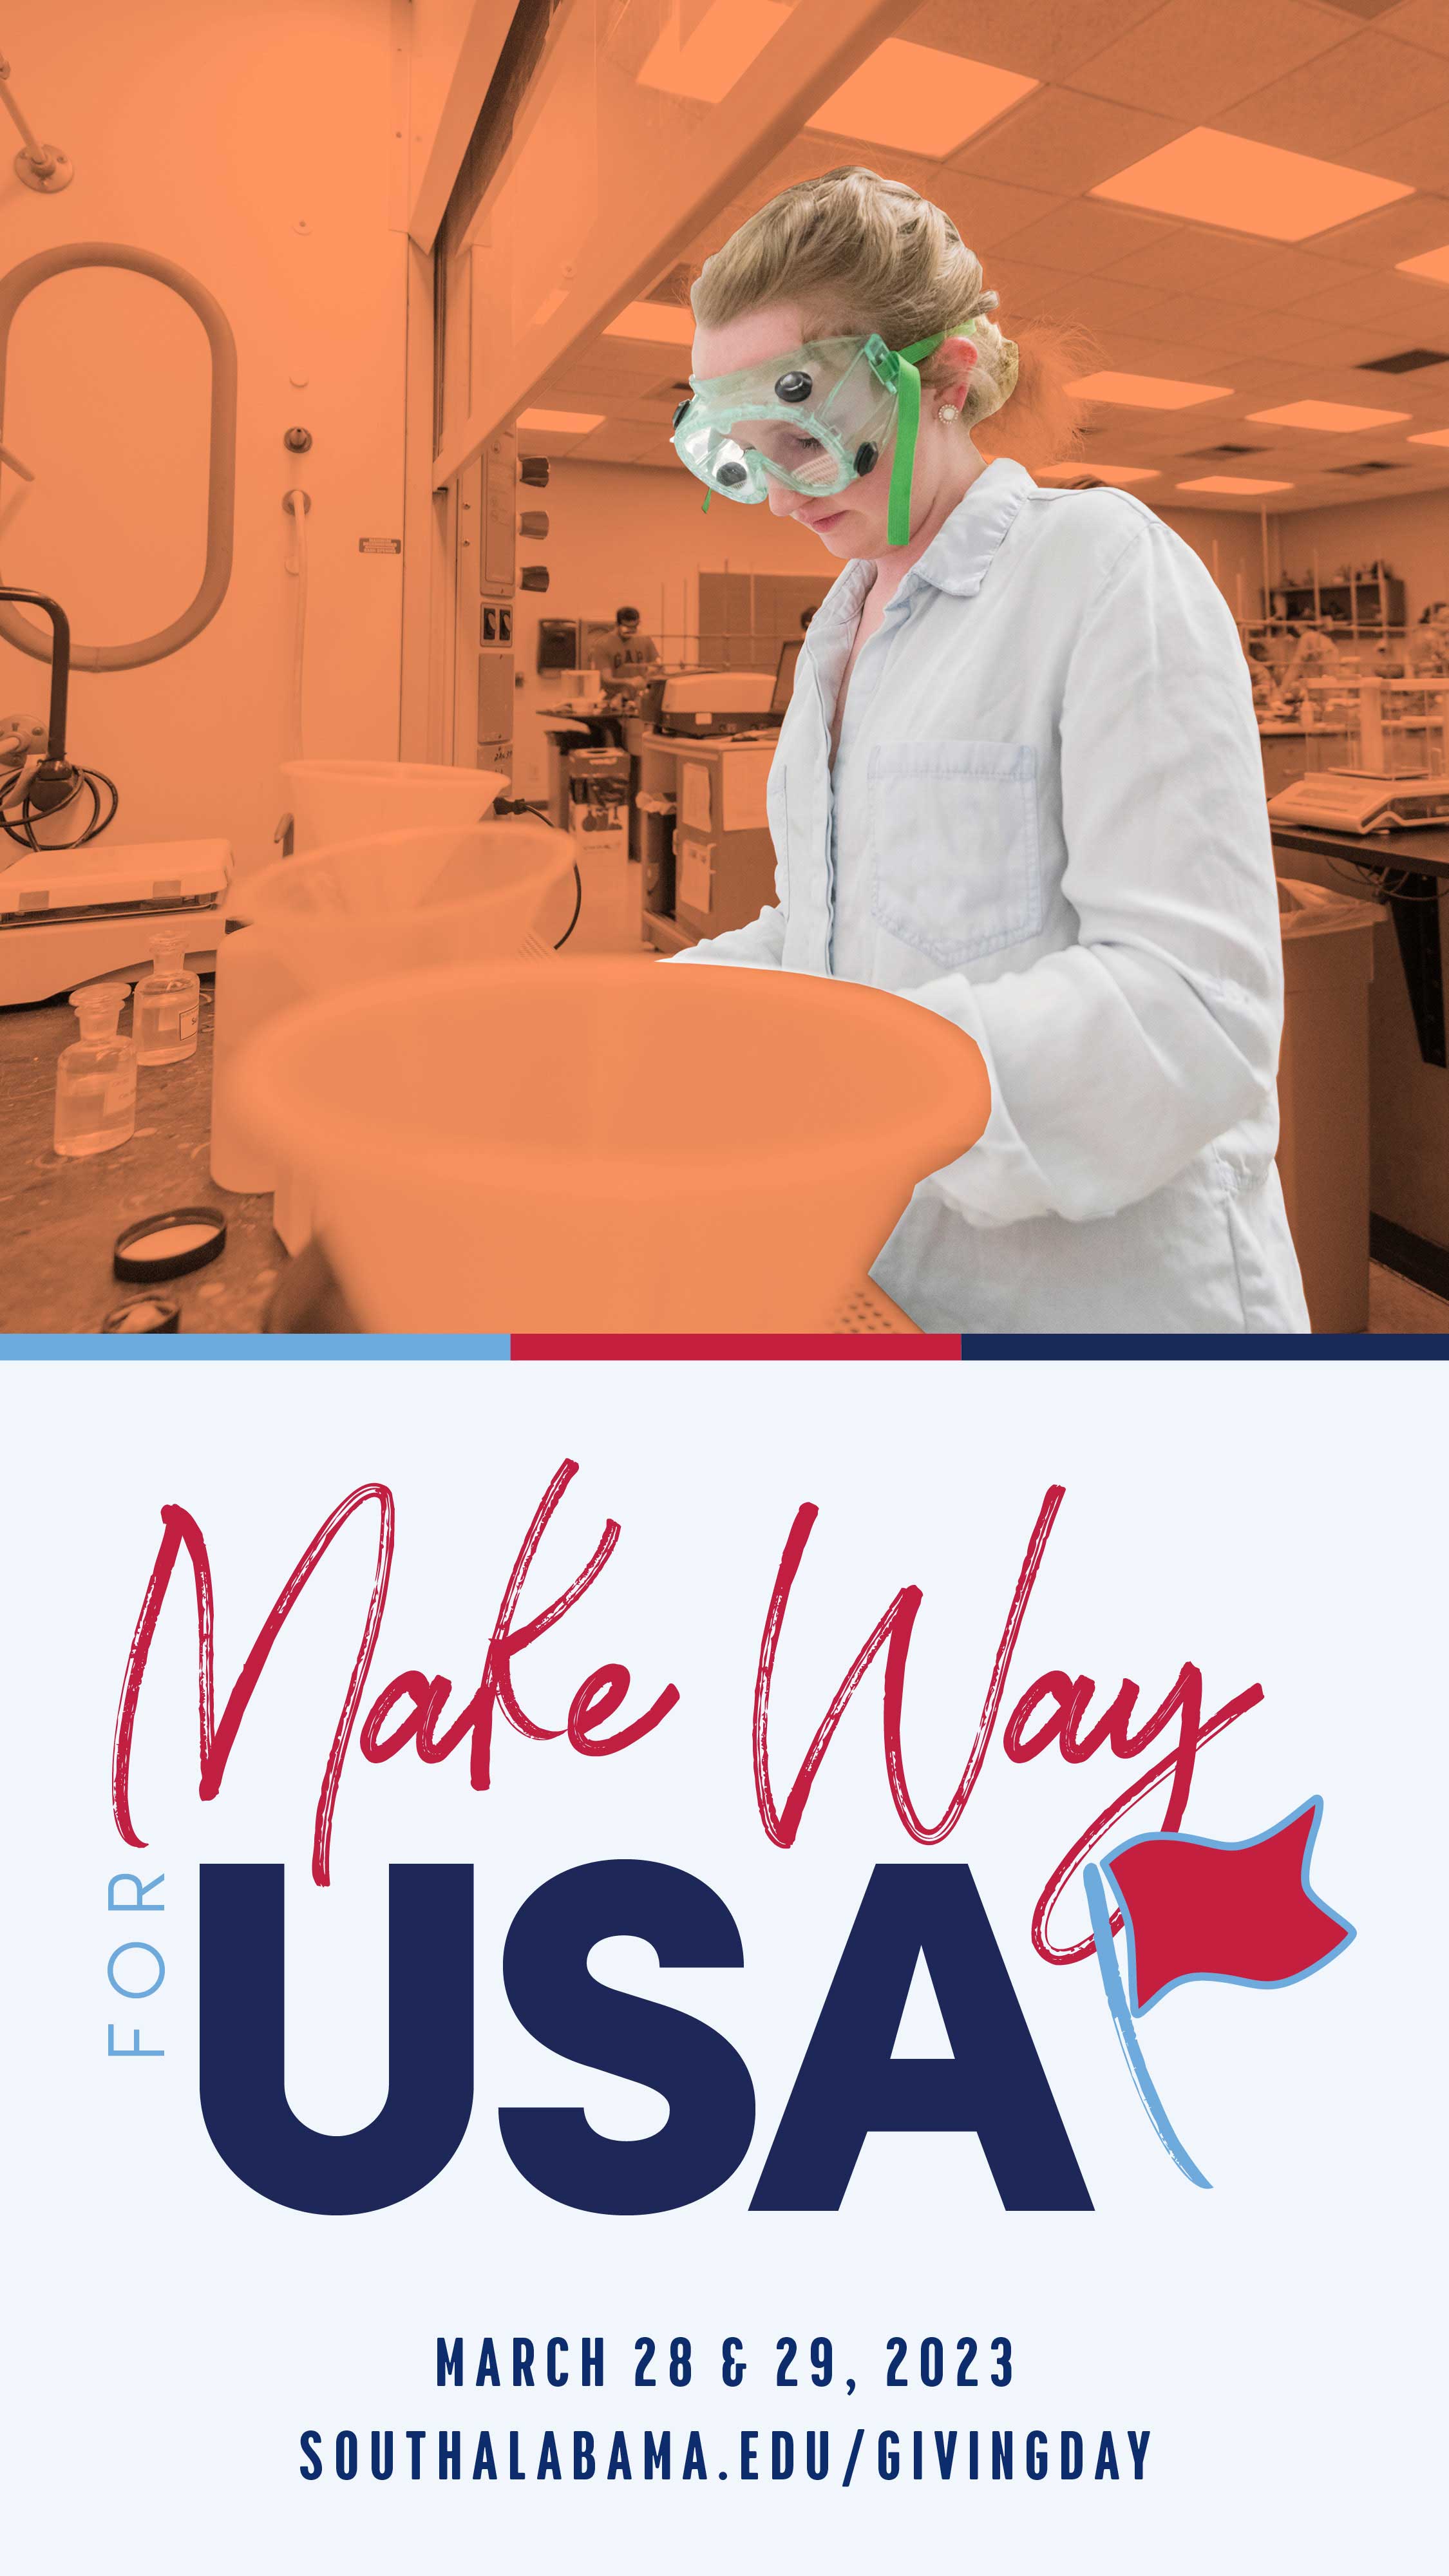 Facebook or Instagram Make Way for USA March 28 and 29, 2023 Southalabama.edu/givingday with image of student working in lab on campus.